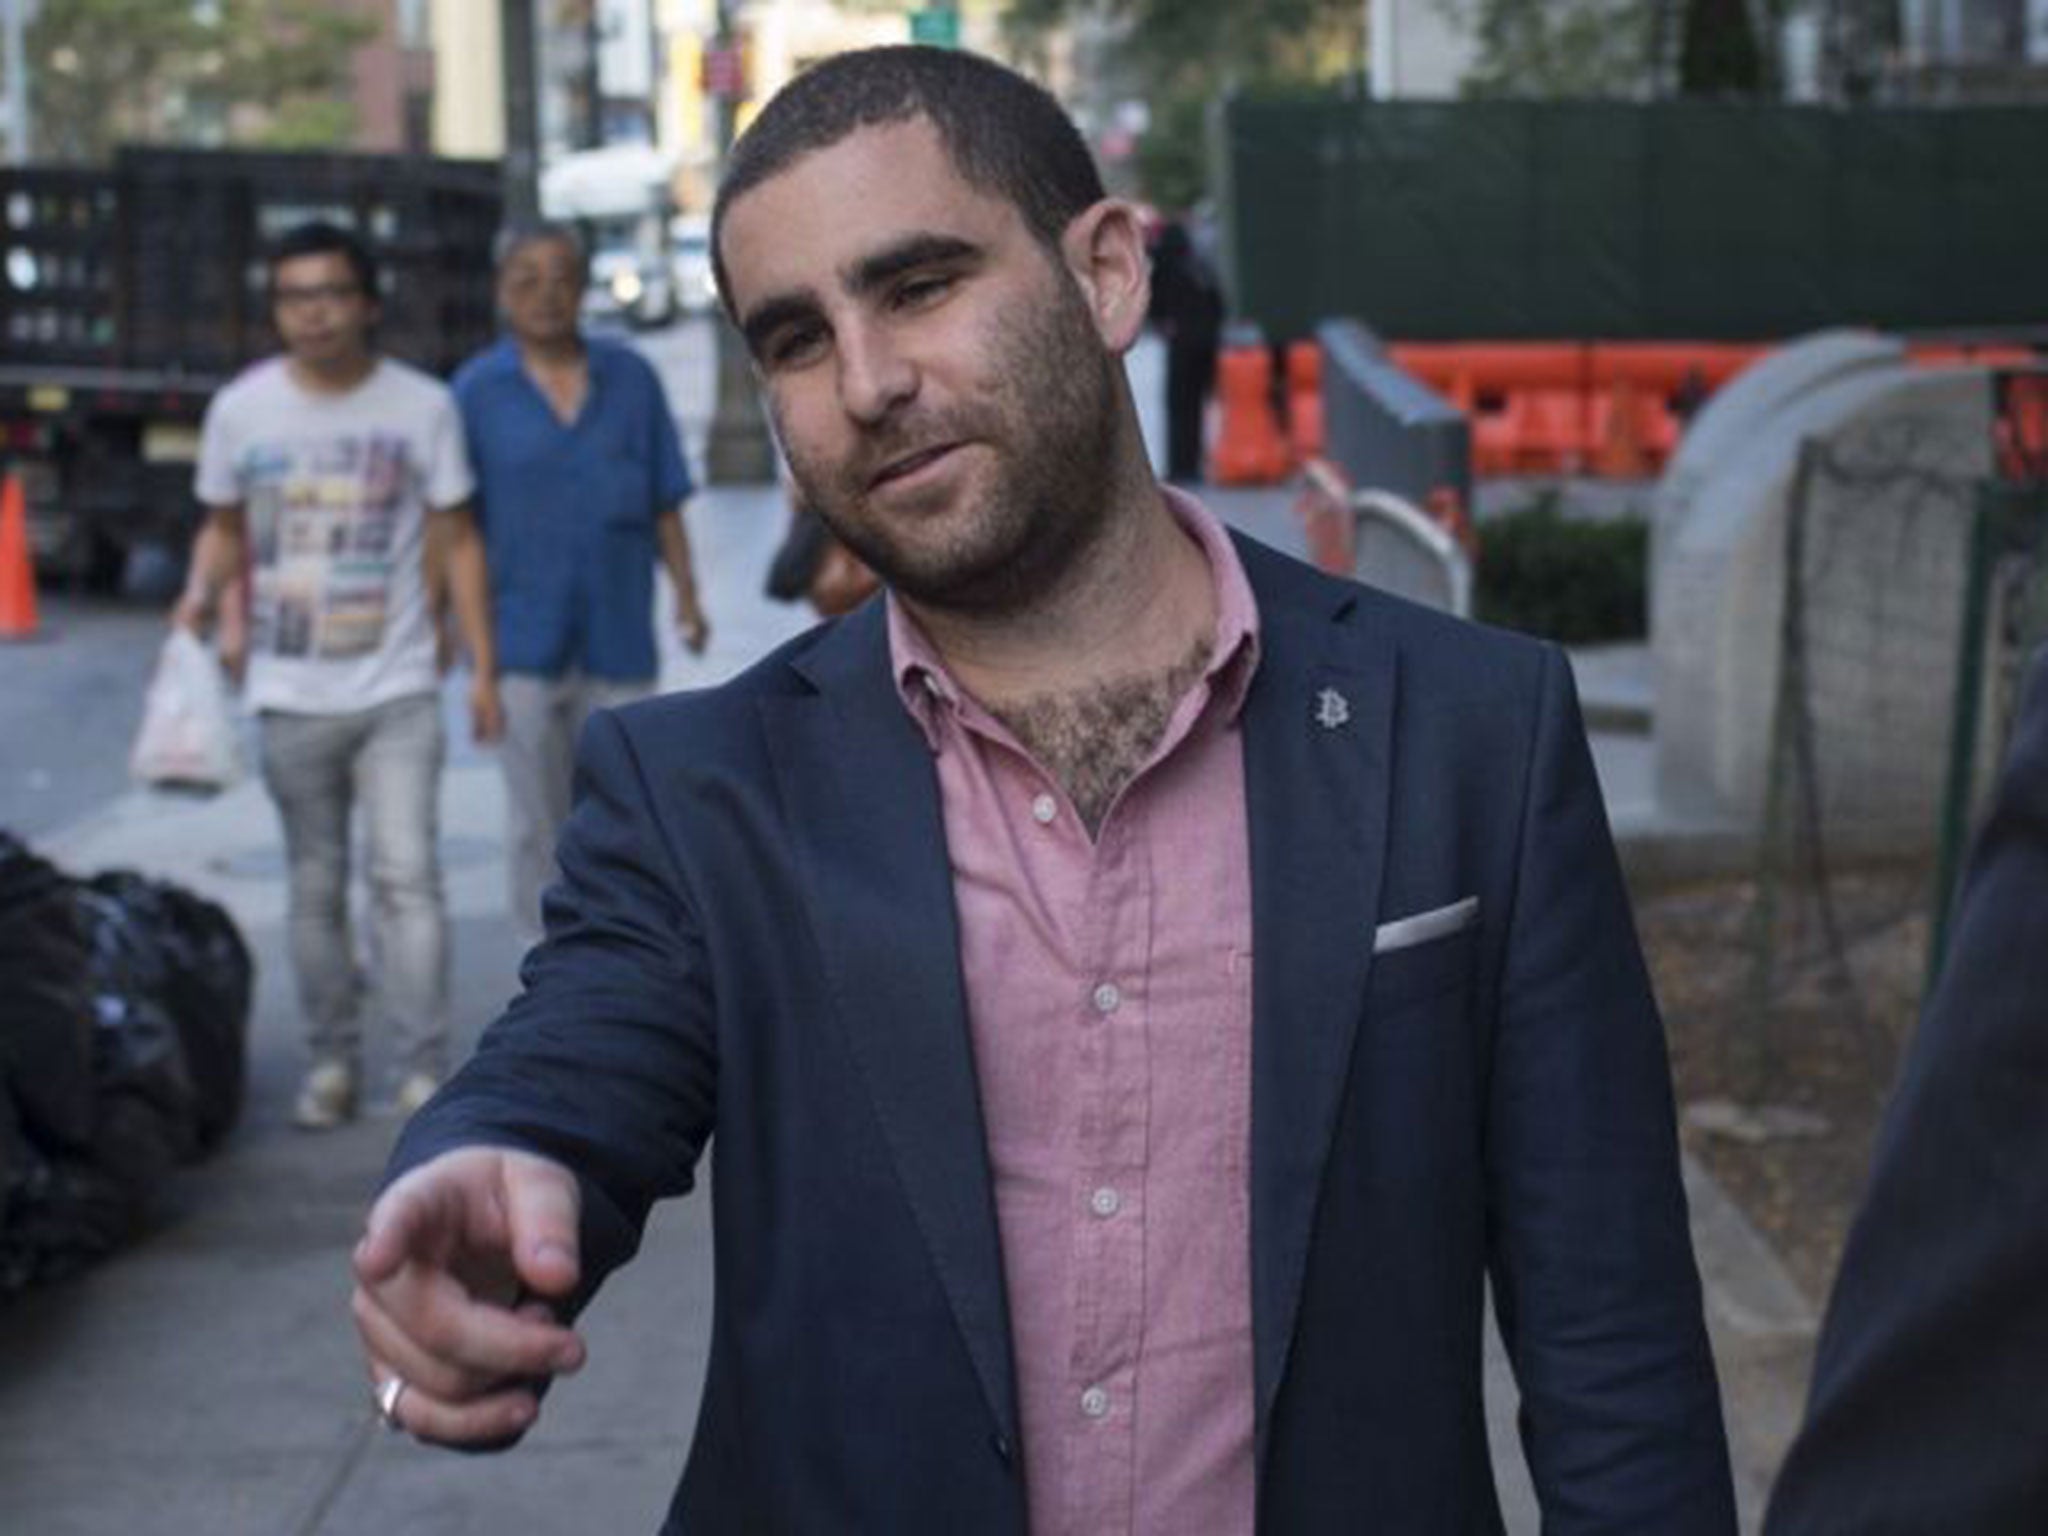 Charlie Shrem pleaded guilty at a hearing in New York federal court to one count of aiding and abetting an unlicensed money transmitting business